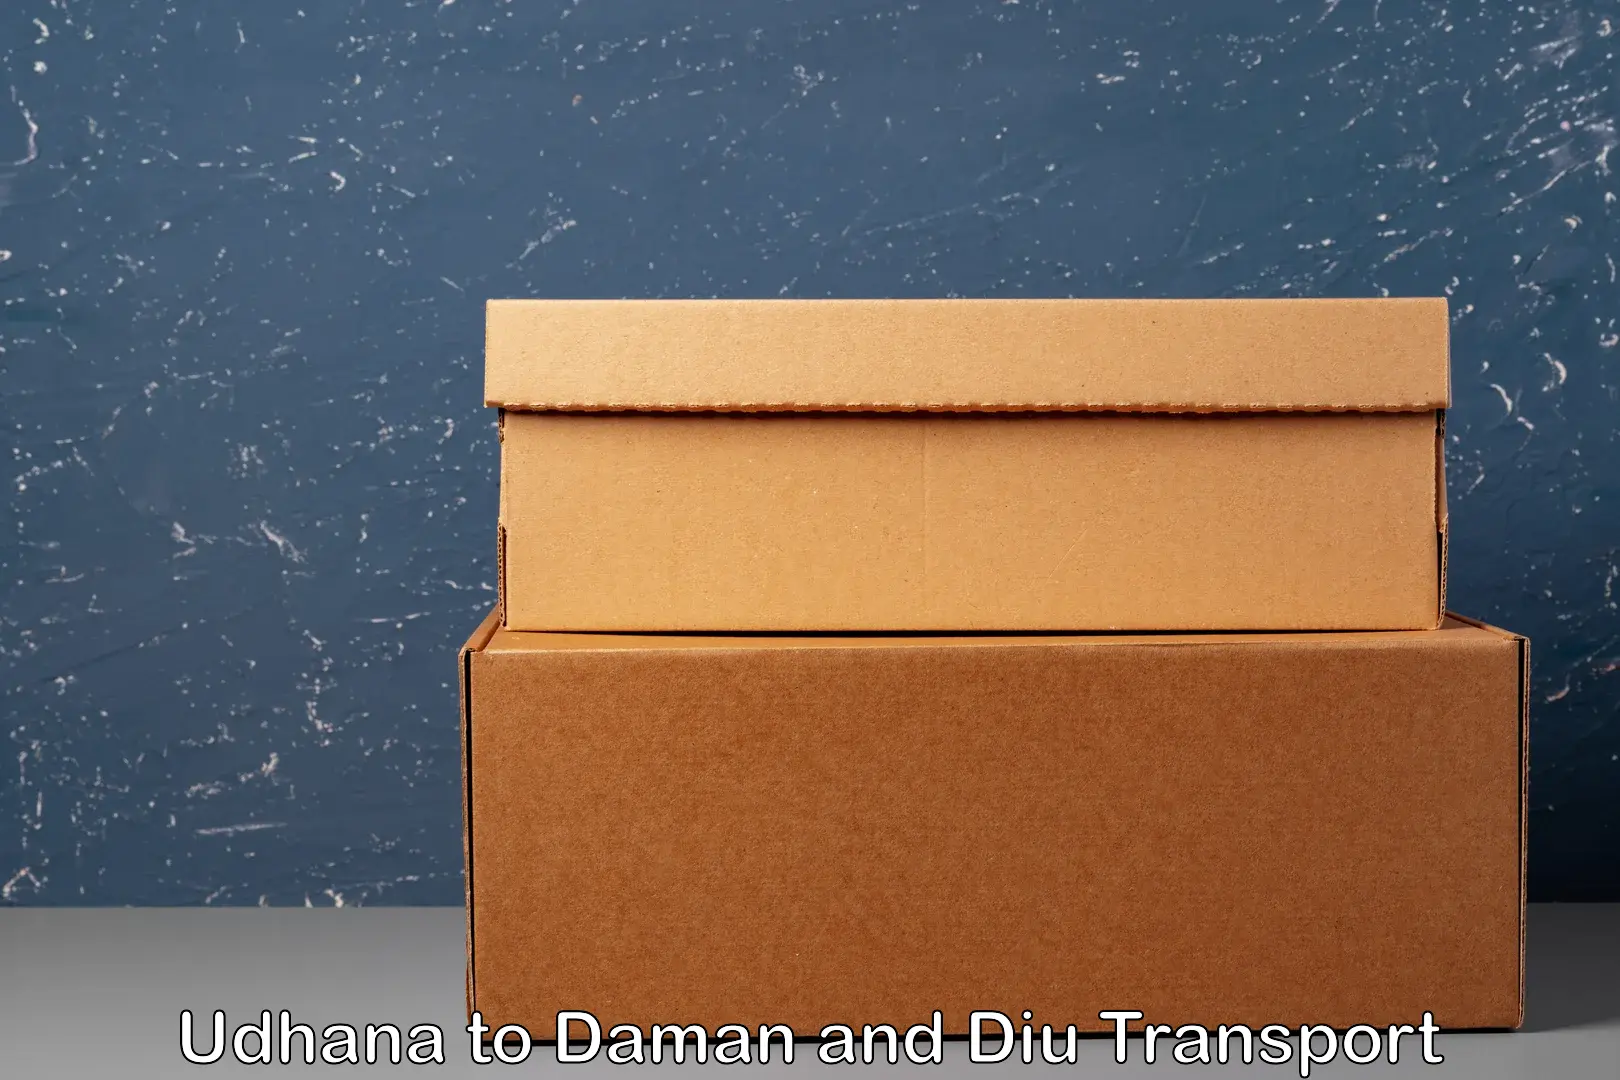 Two wheeler parcel service Udhana to Daman and Diu